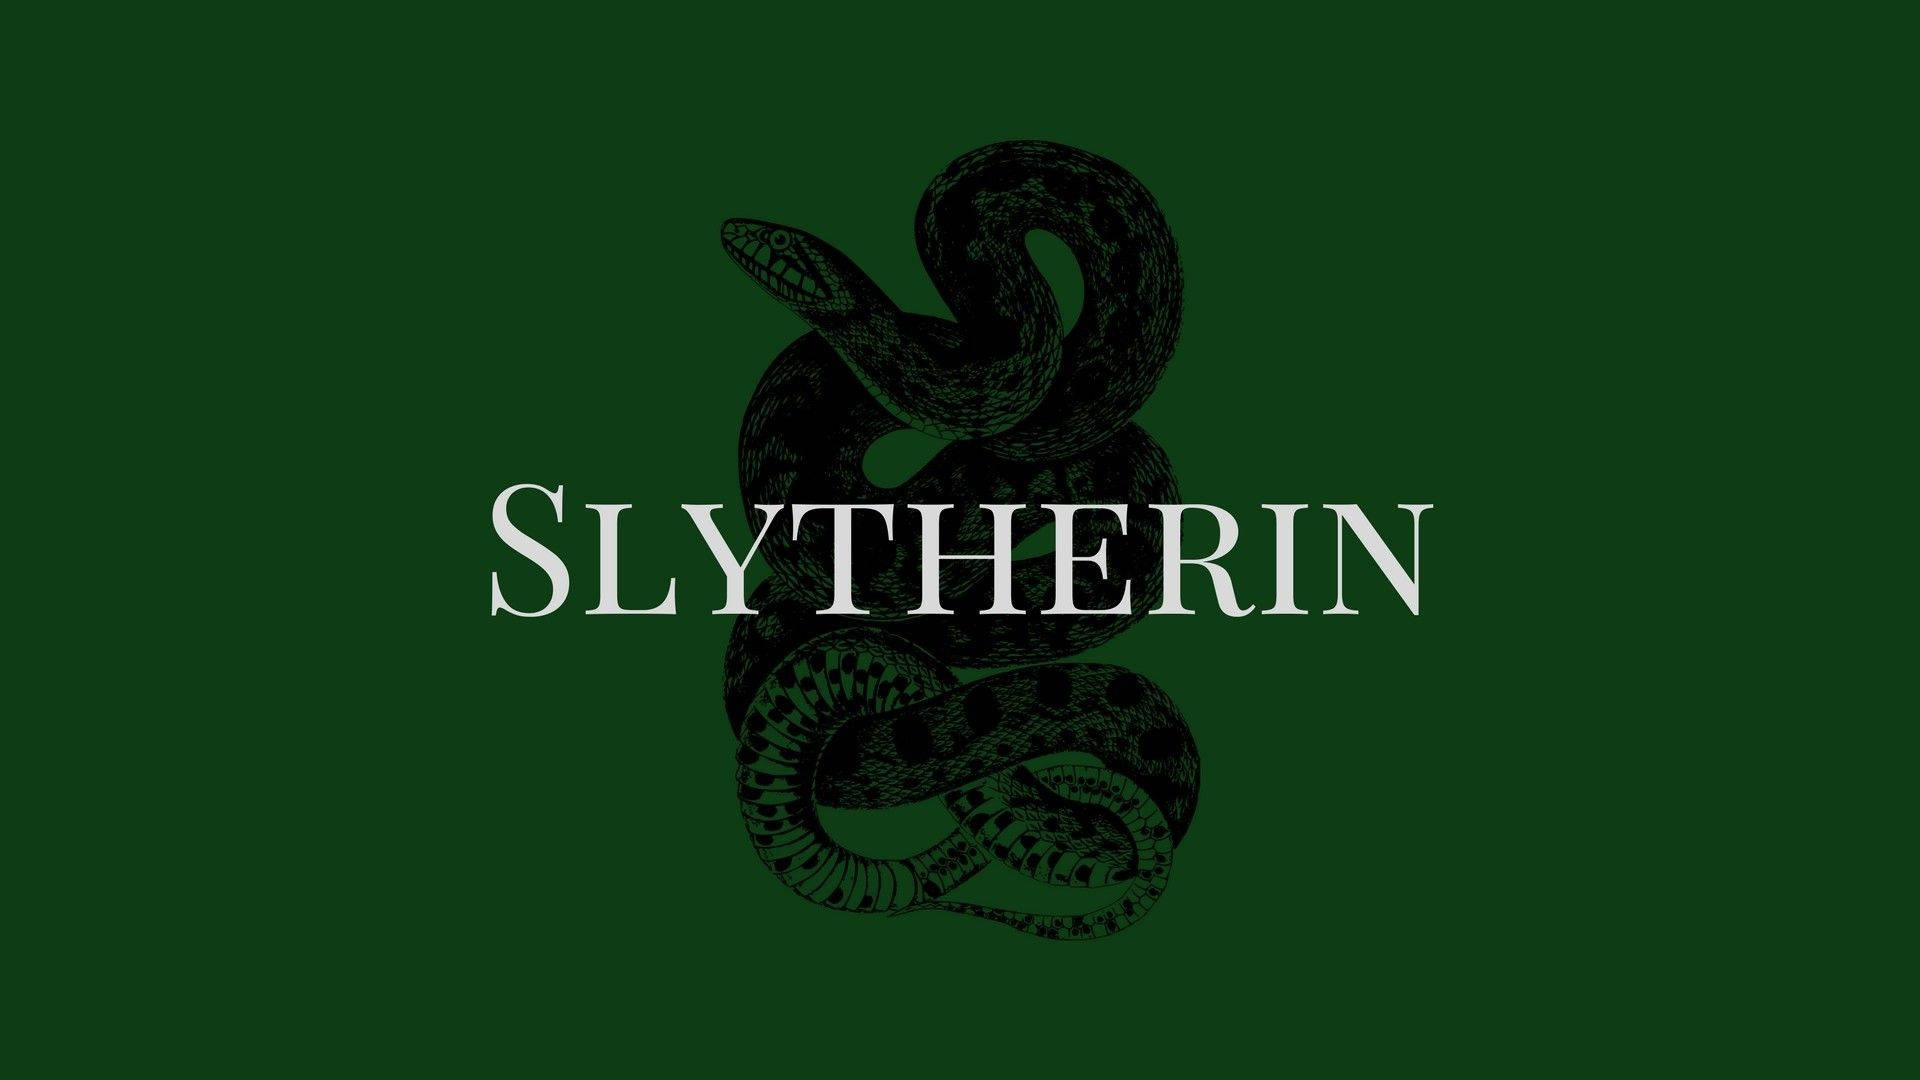 Free Slytherin Aesthetic Wallpaper Downloads, [100+] Slytherin Aesthetic  Wallpapers for FREE 